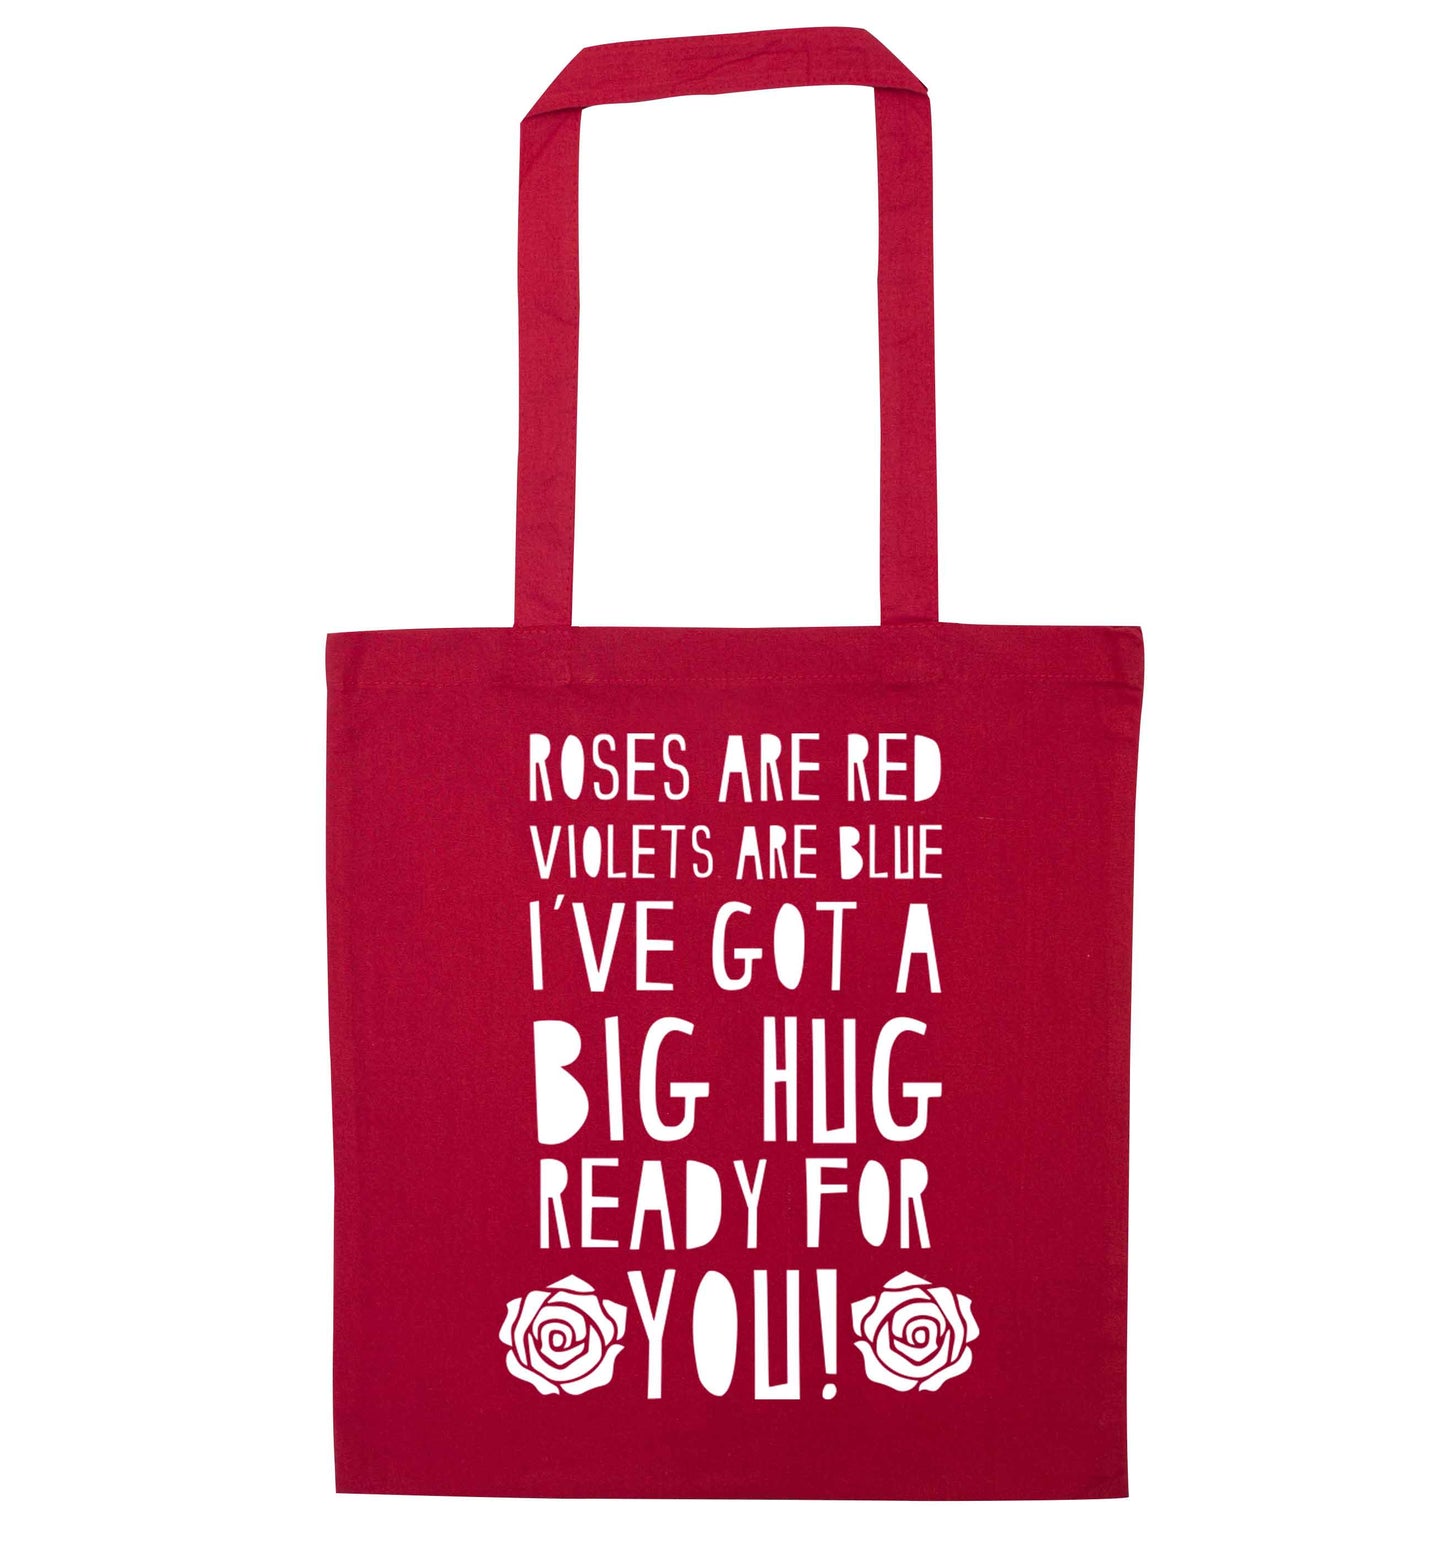 Roses are red violets are blue I've got a big hug coming for you red tote bag